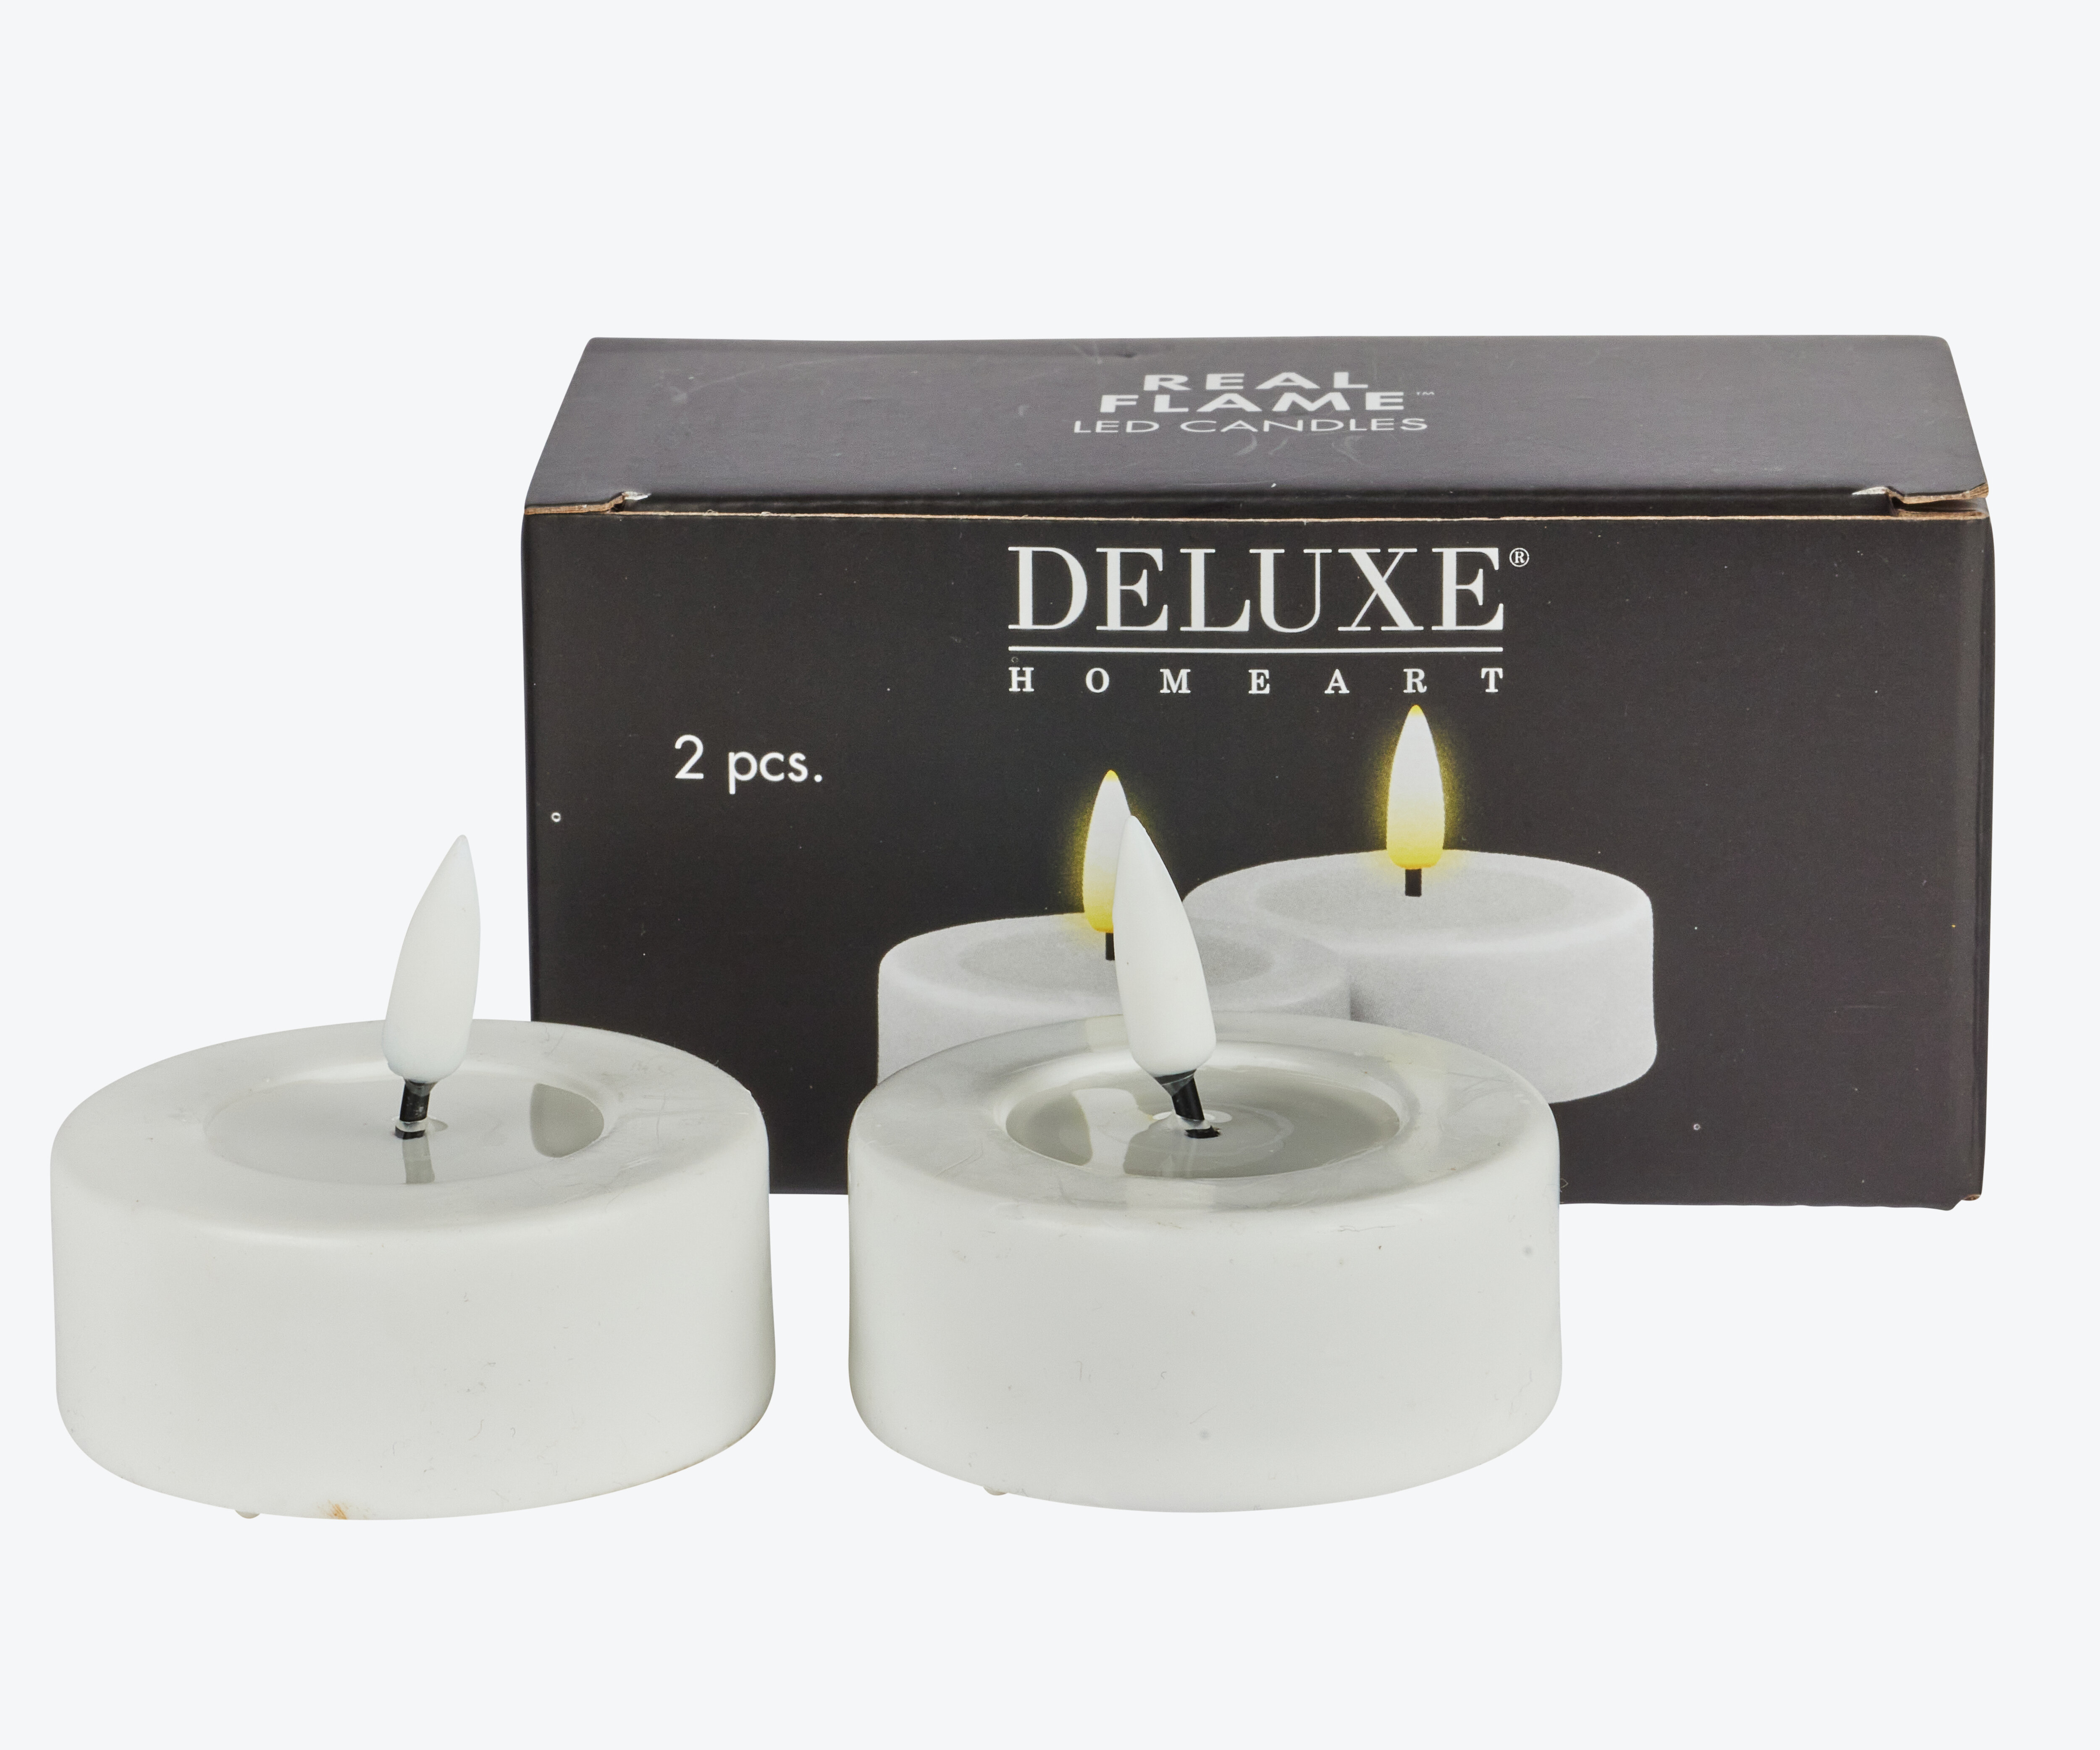 Deluxe led 2pk. Store